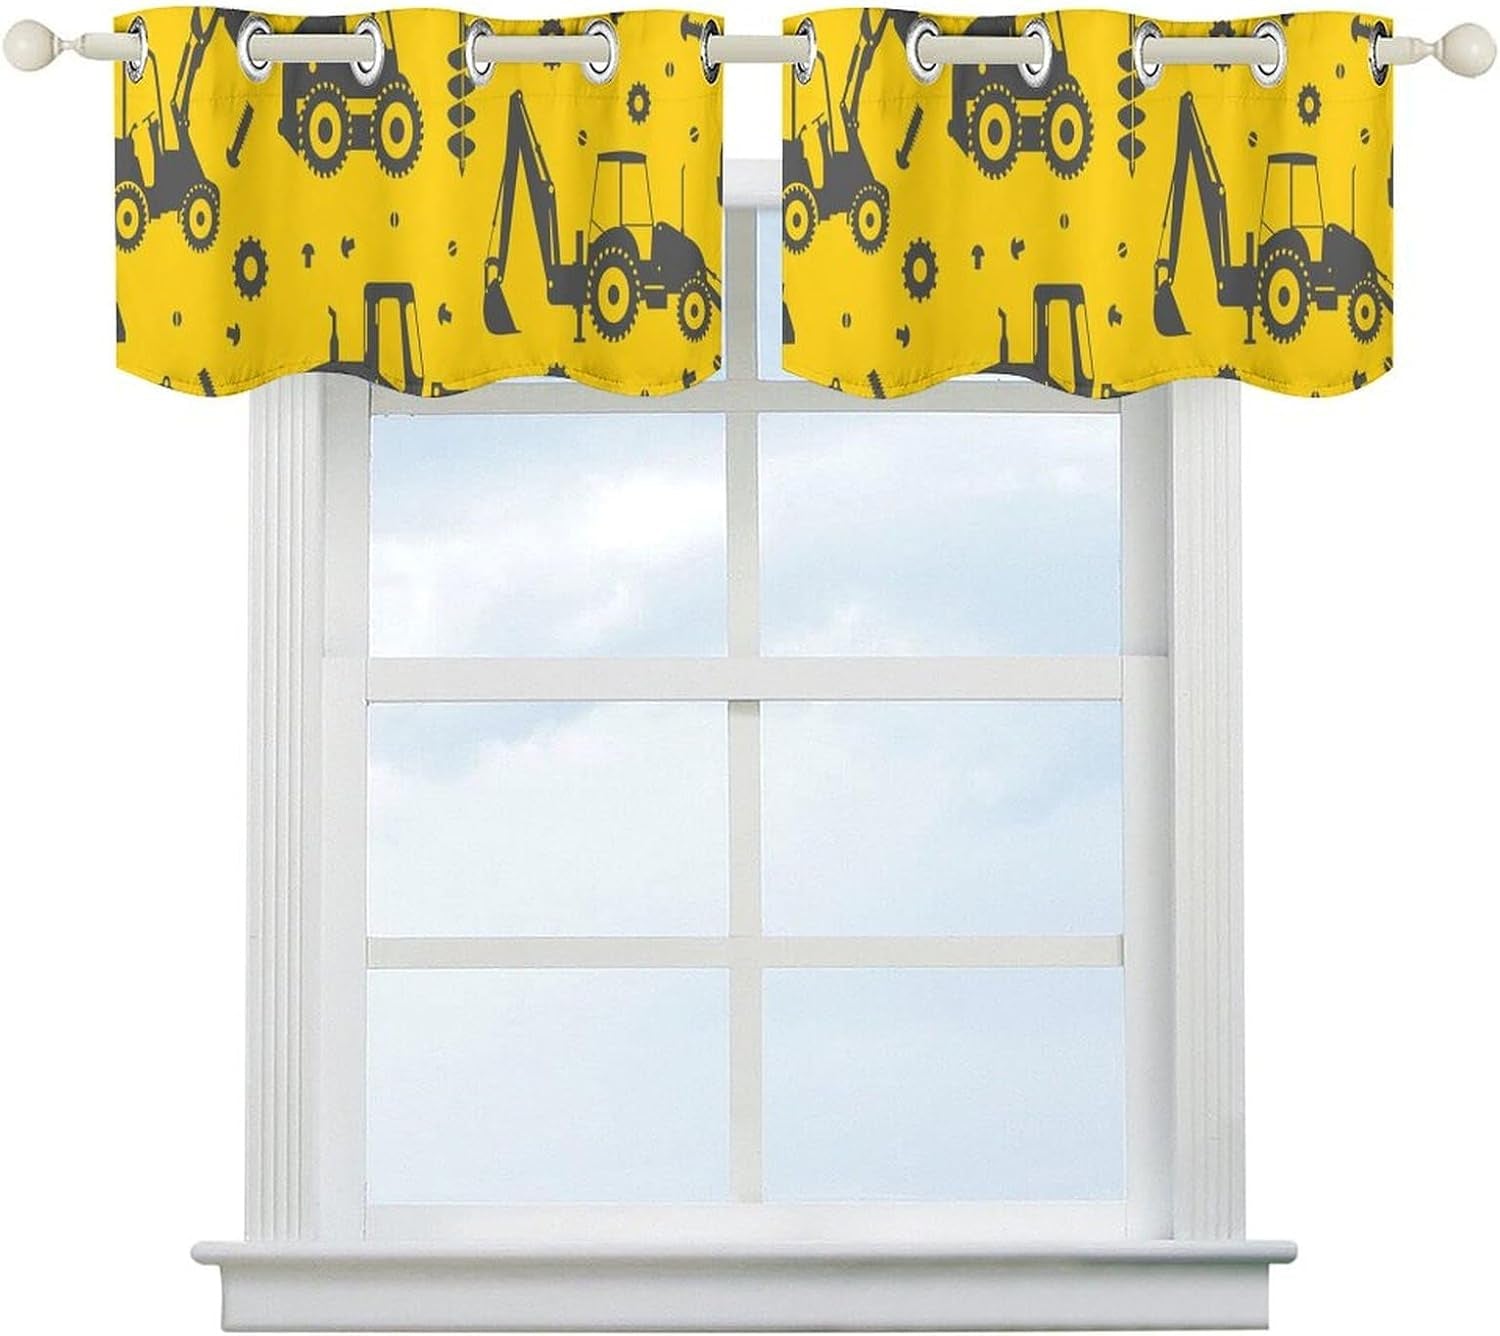 Cartoon Car Window Valances Cute Heavy Equipment Machinery Grommet Blackout Curtain Valance Window Toppers Valances for Home Kitchen Living Room Decor 52X16 Inches 2 Pcs